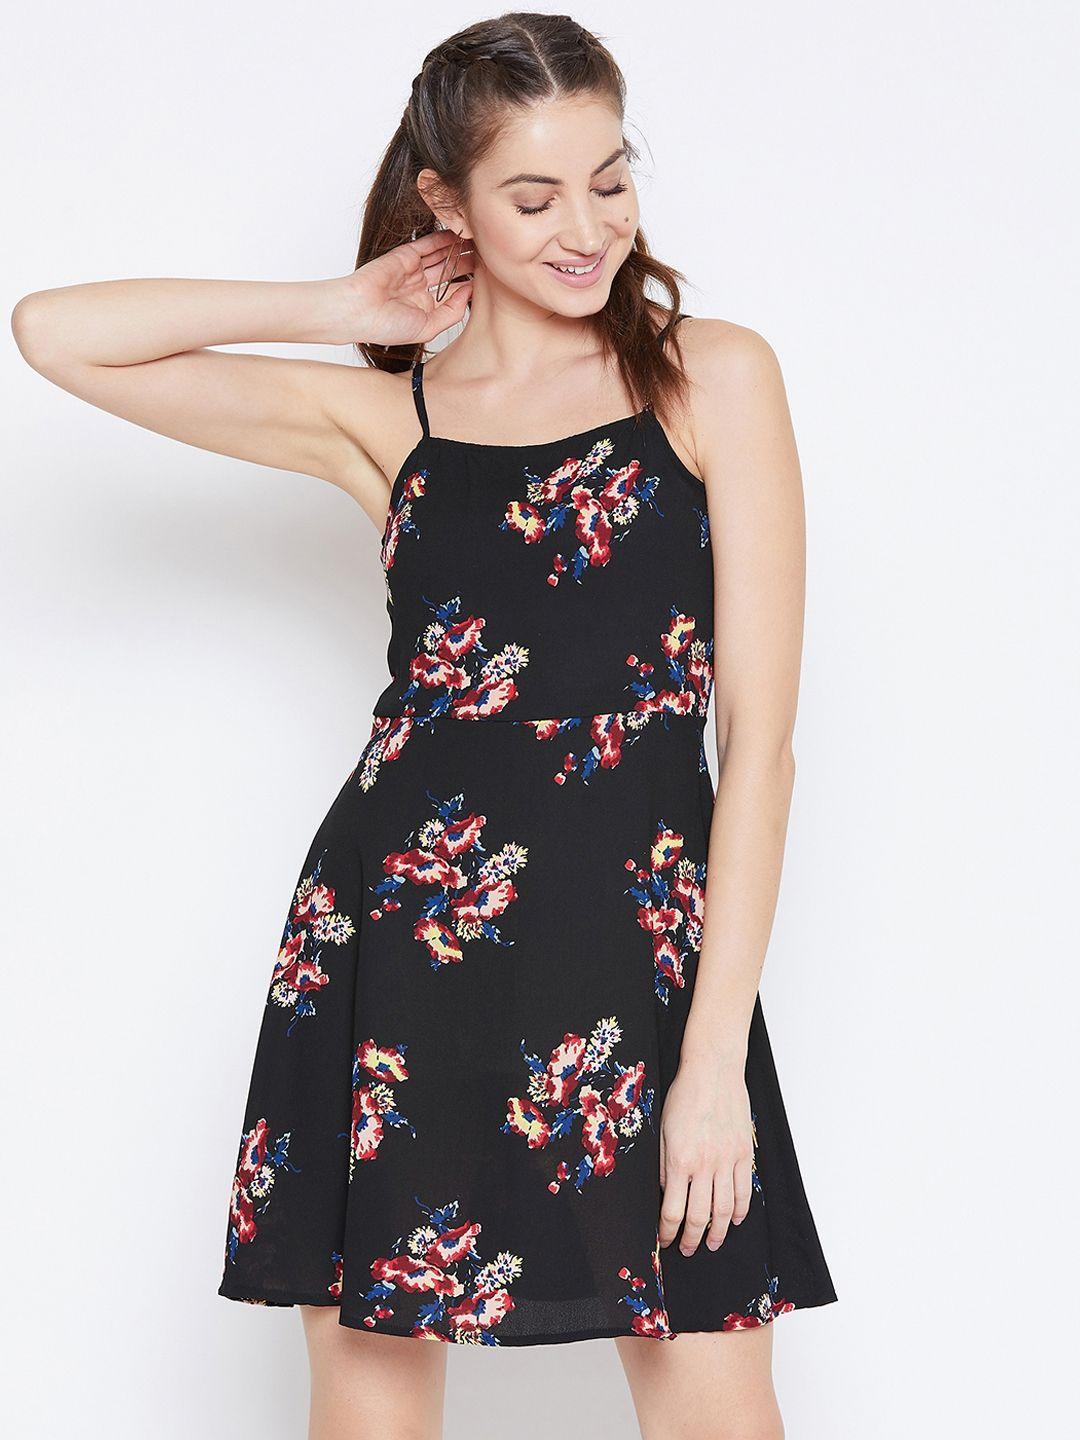 berrylush women black & red floral printed fit and flare dress